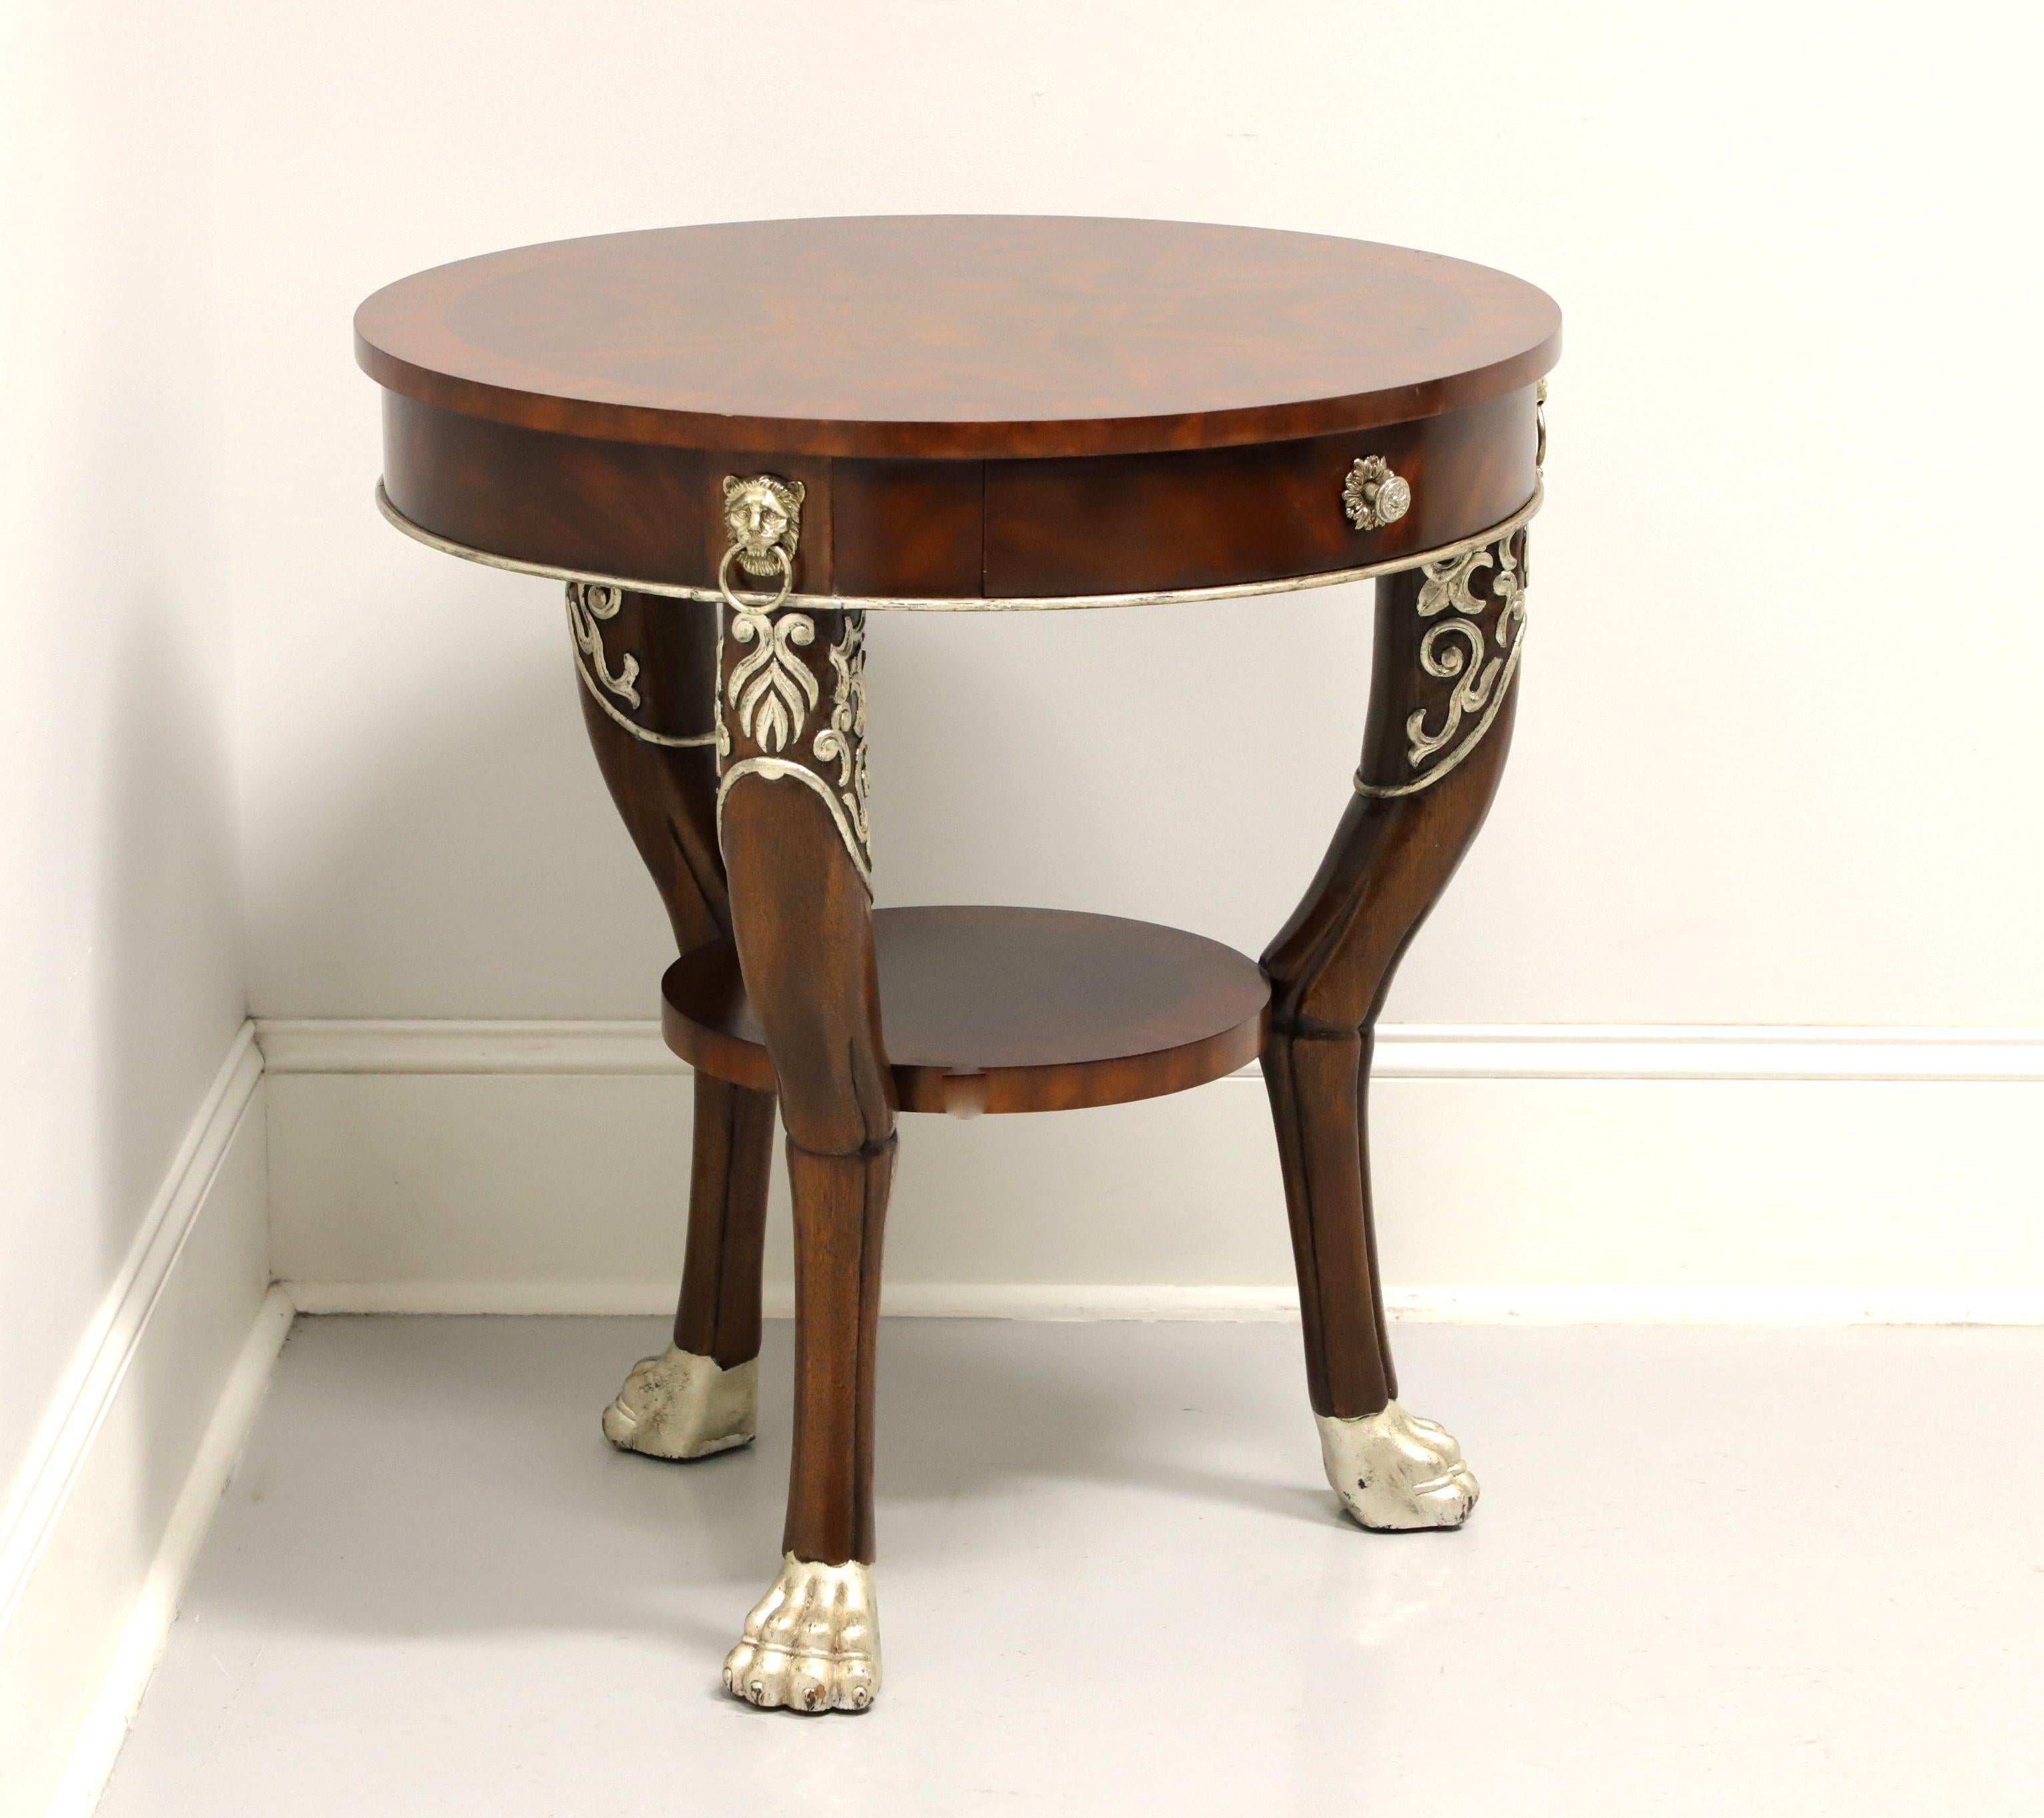 A round accent table in the Regency style by Maitland Smith. Mahogany with banded & inlaid flame mahogany top, decorative metal hardware including three lion masks holding a ring over the legs, silver-gold color painted carved accents to apron &